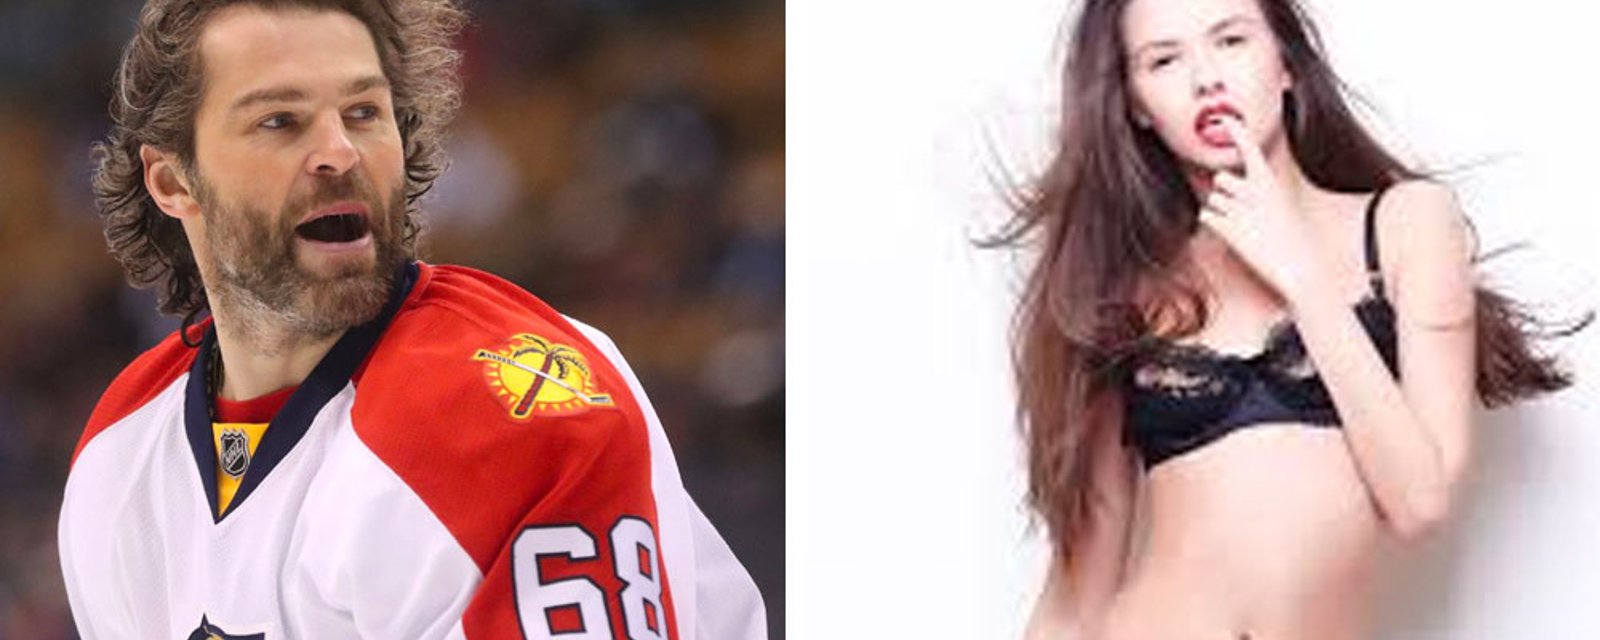 Jagr shares photo of himself and his 28 year old swimsuit model girlfriend